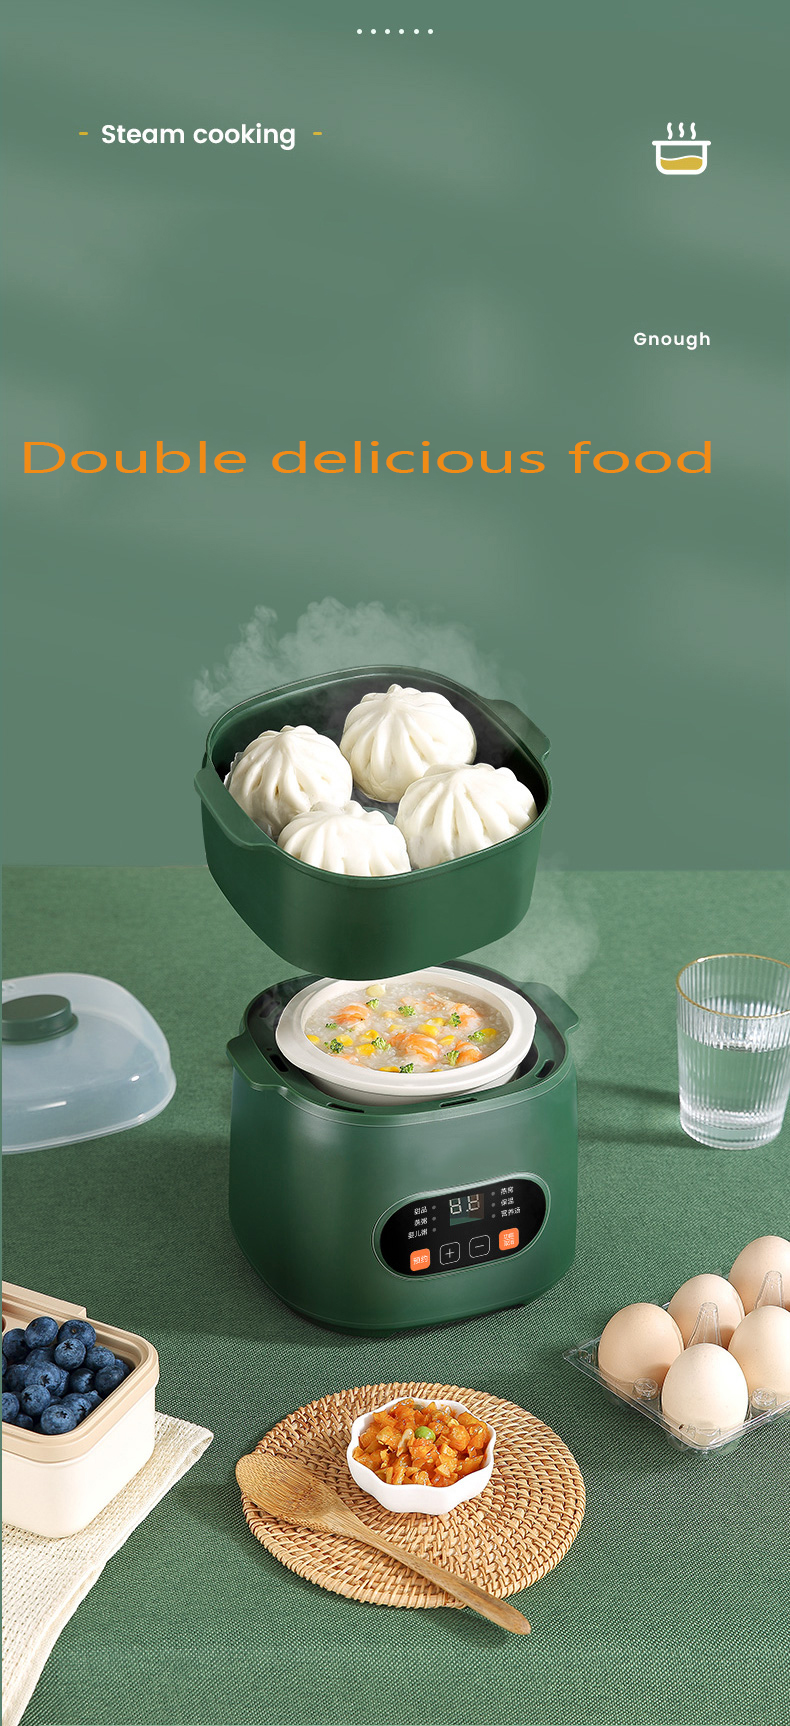 Automatic Intelligent Ceramic Electric Slow Cooker Steamer Stew Pot